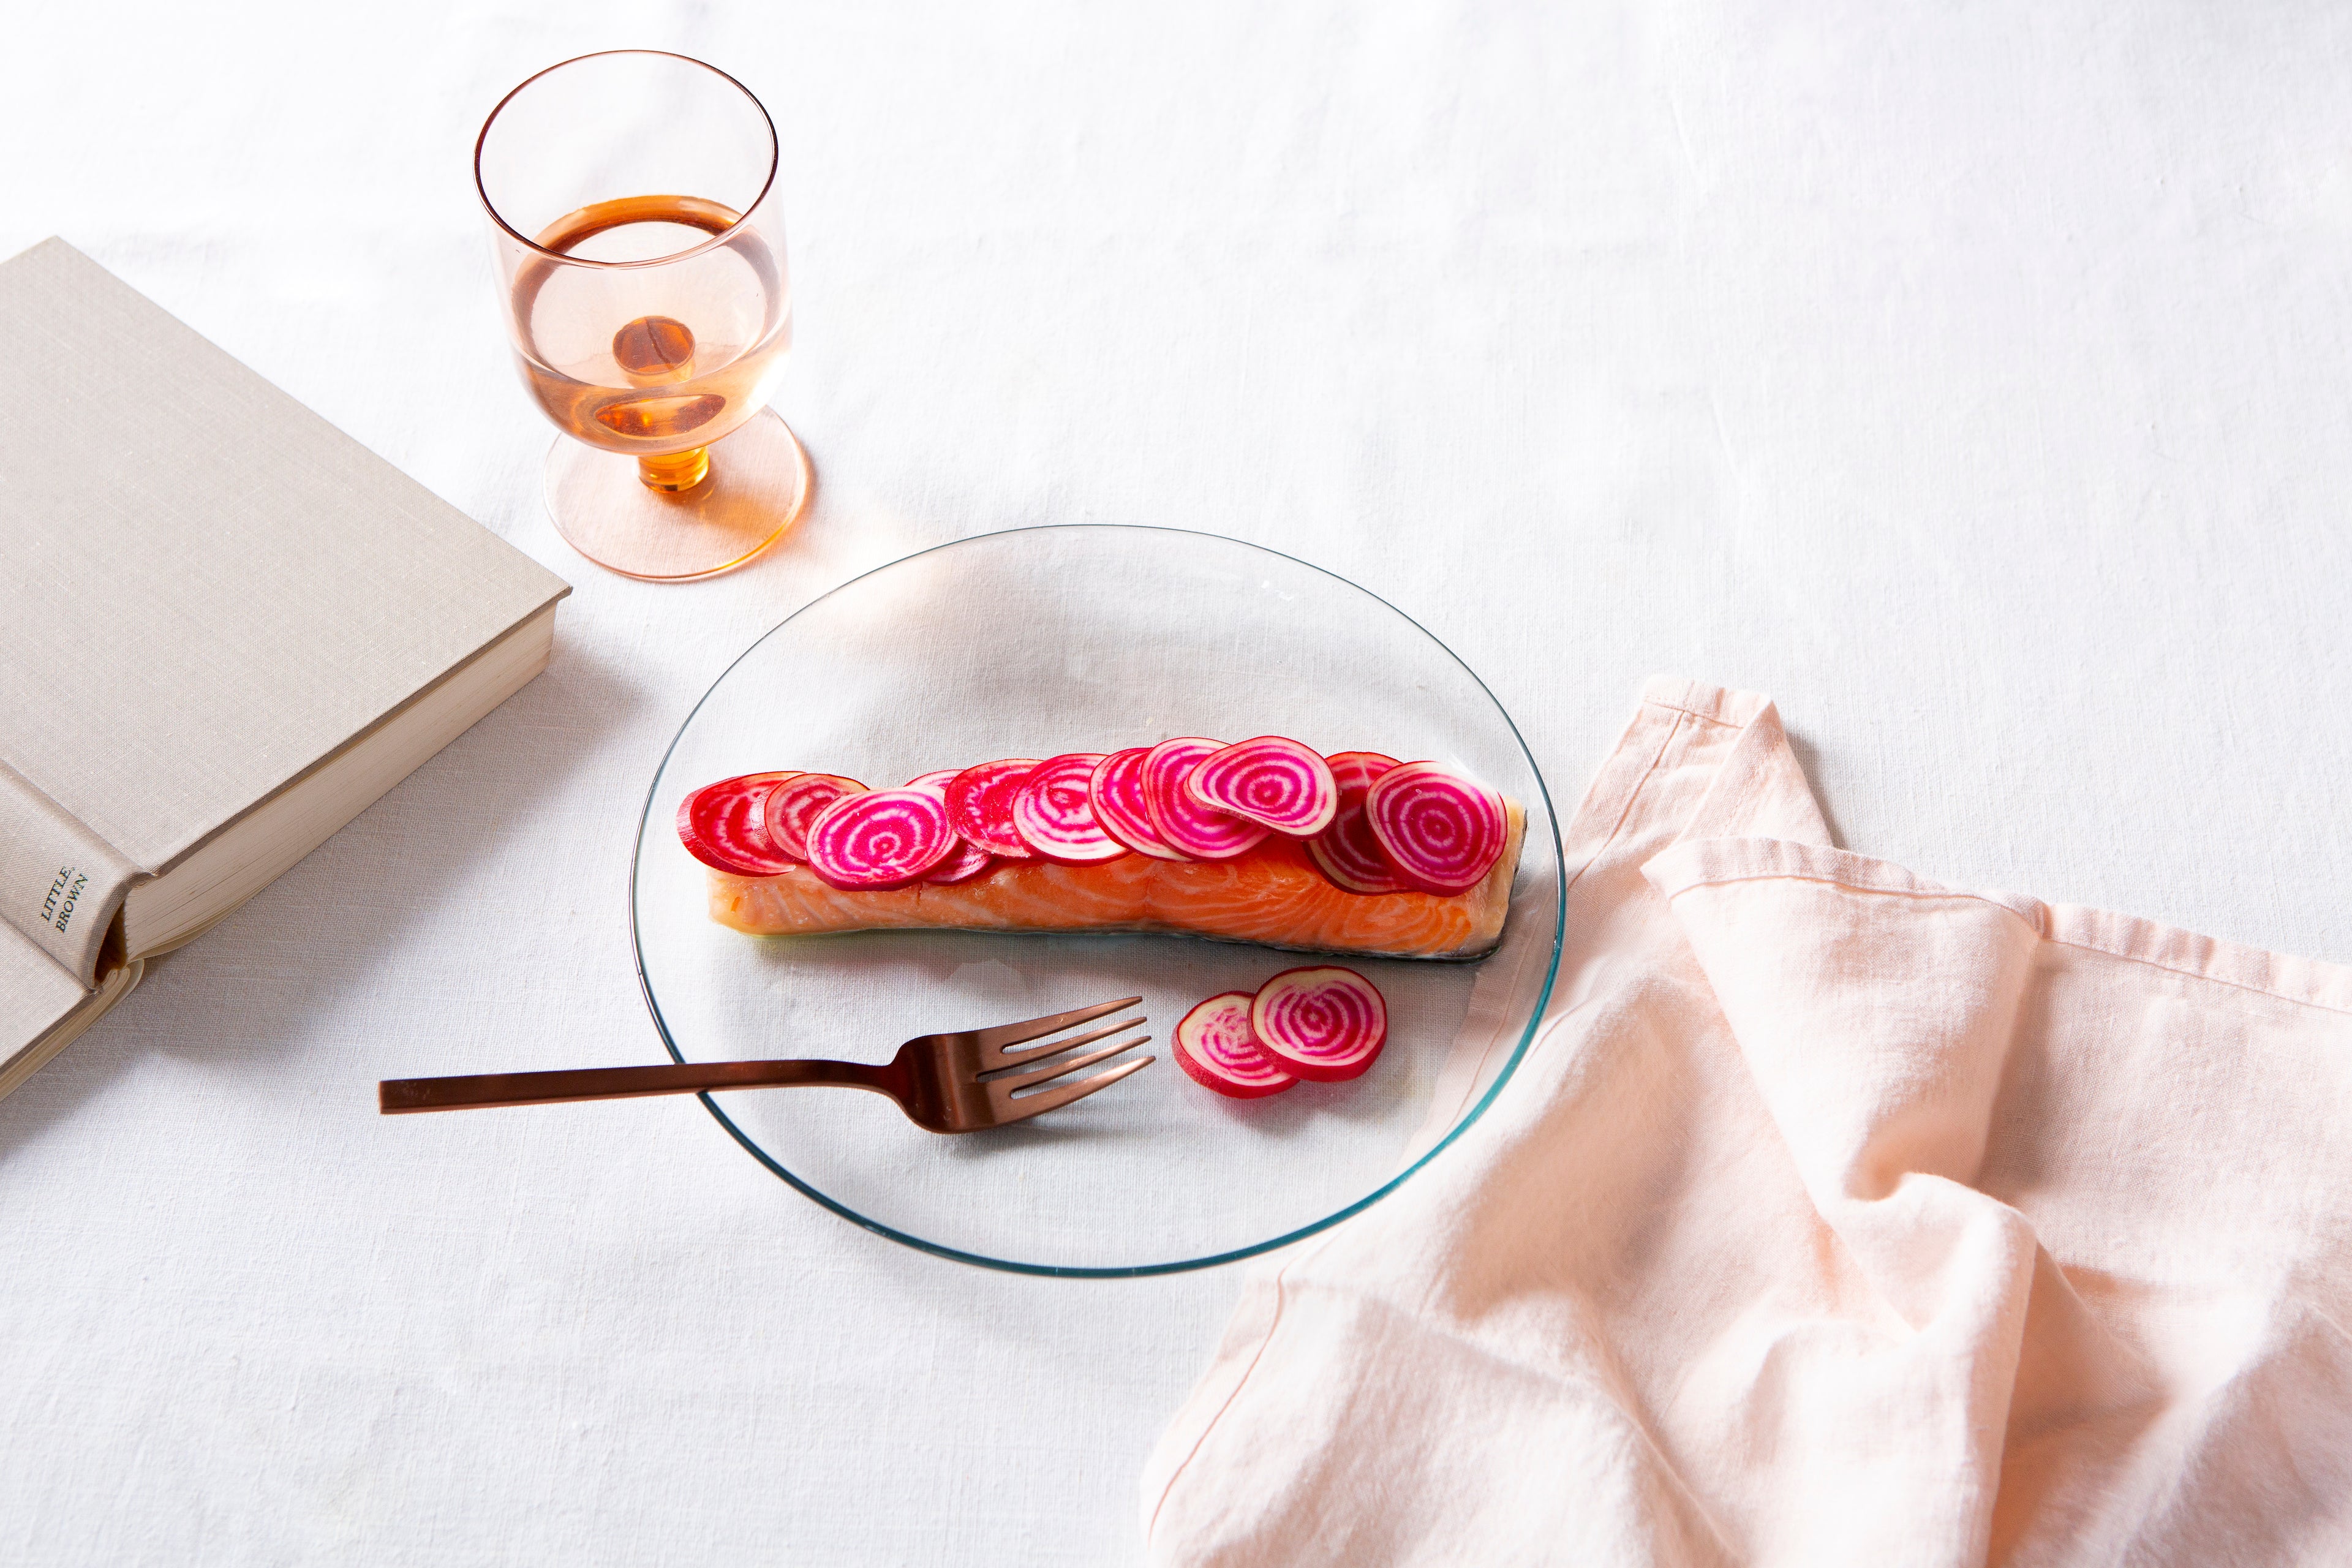 #RaelEats: For when you feel slow and can’t focus: Shaved Beets with Roast Salmon